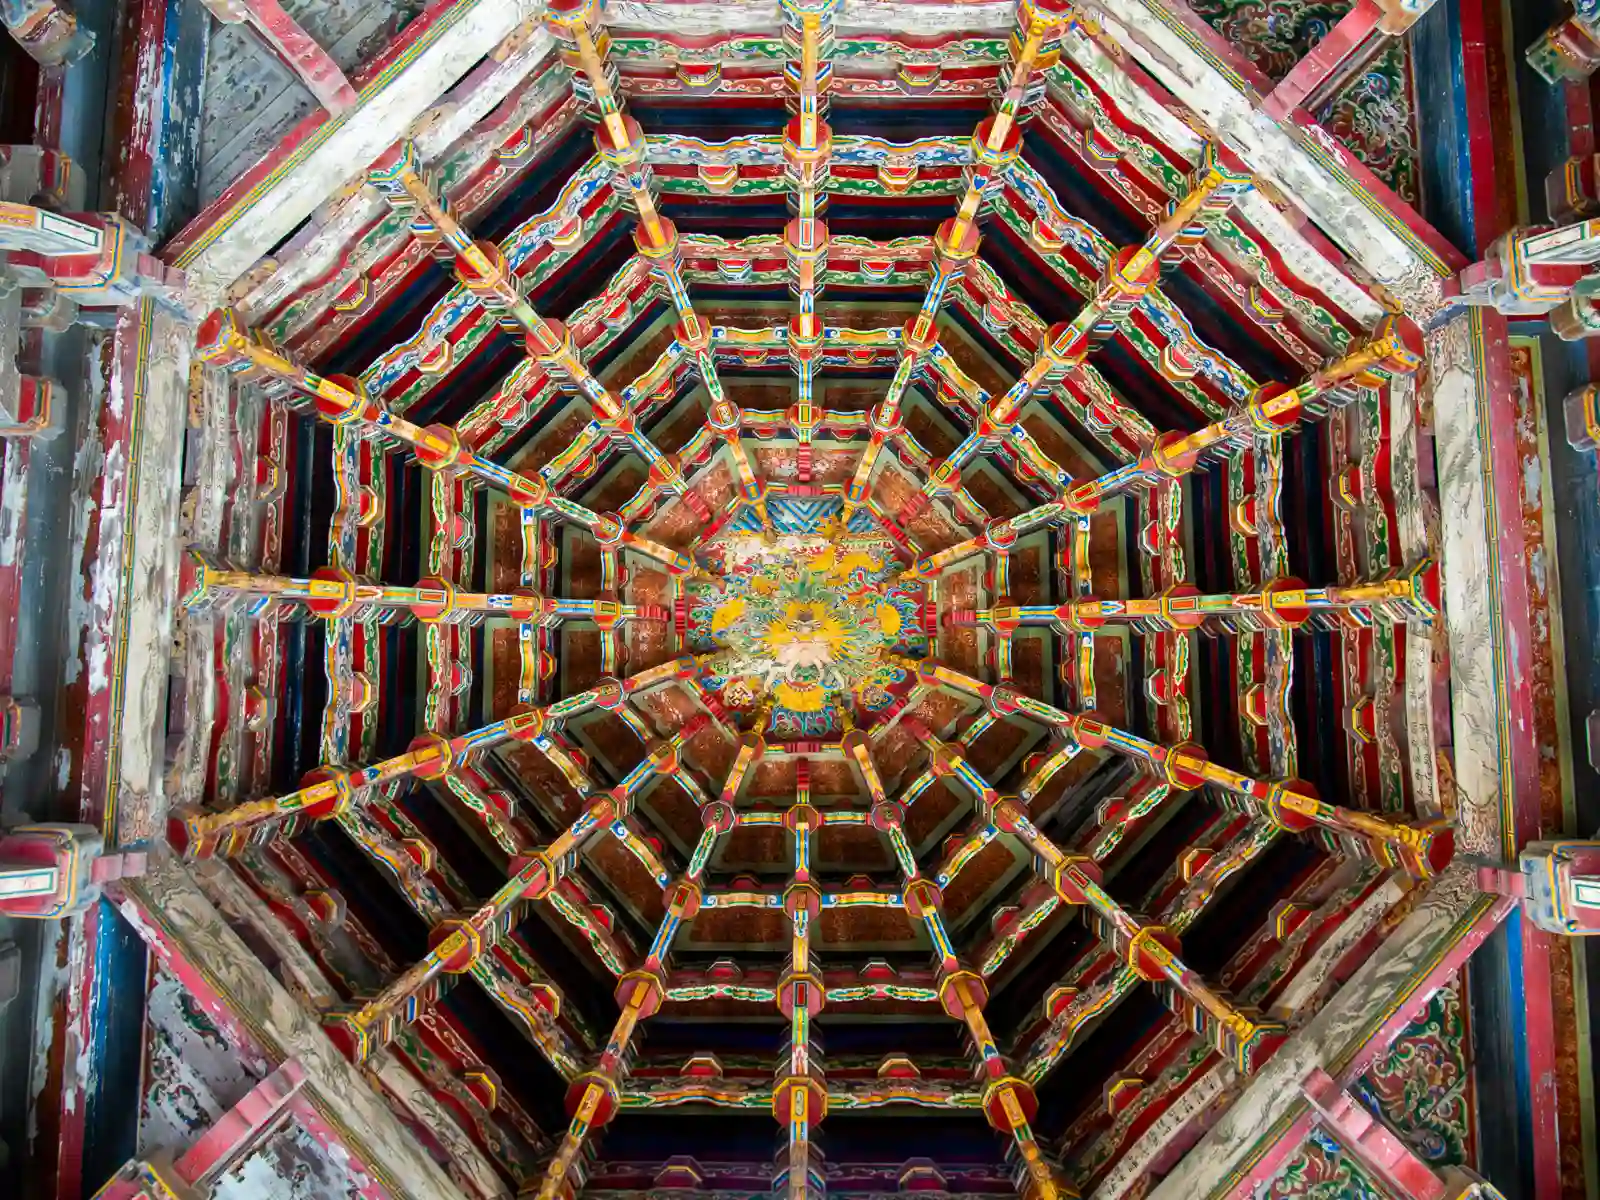 Looking directly upwards into the colorful caisson ceiling in Lukang Longshan Temple